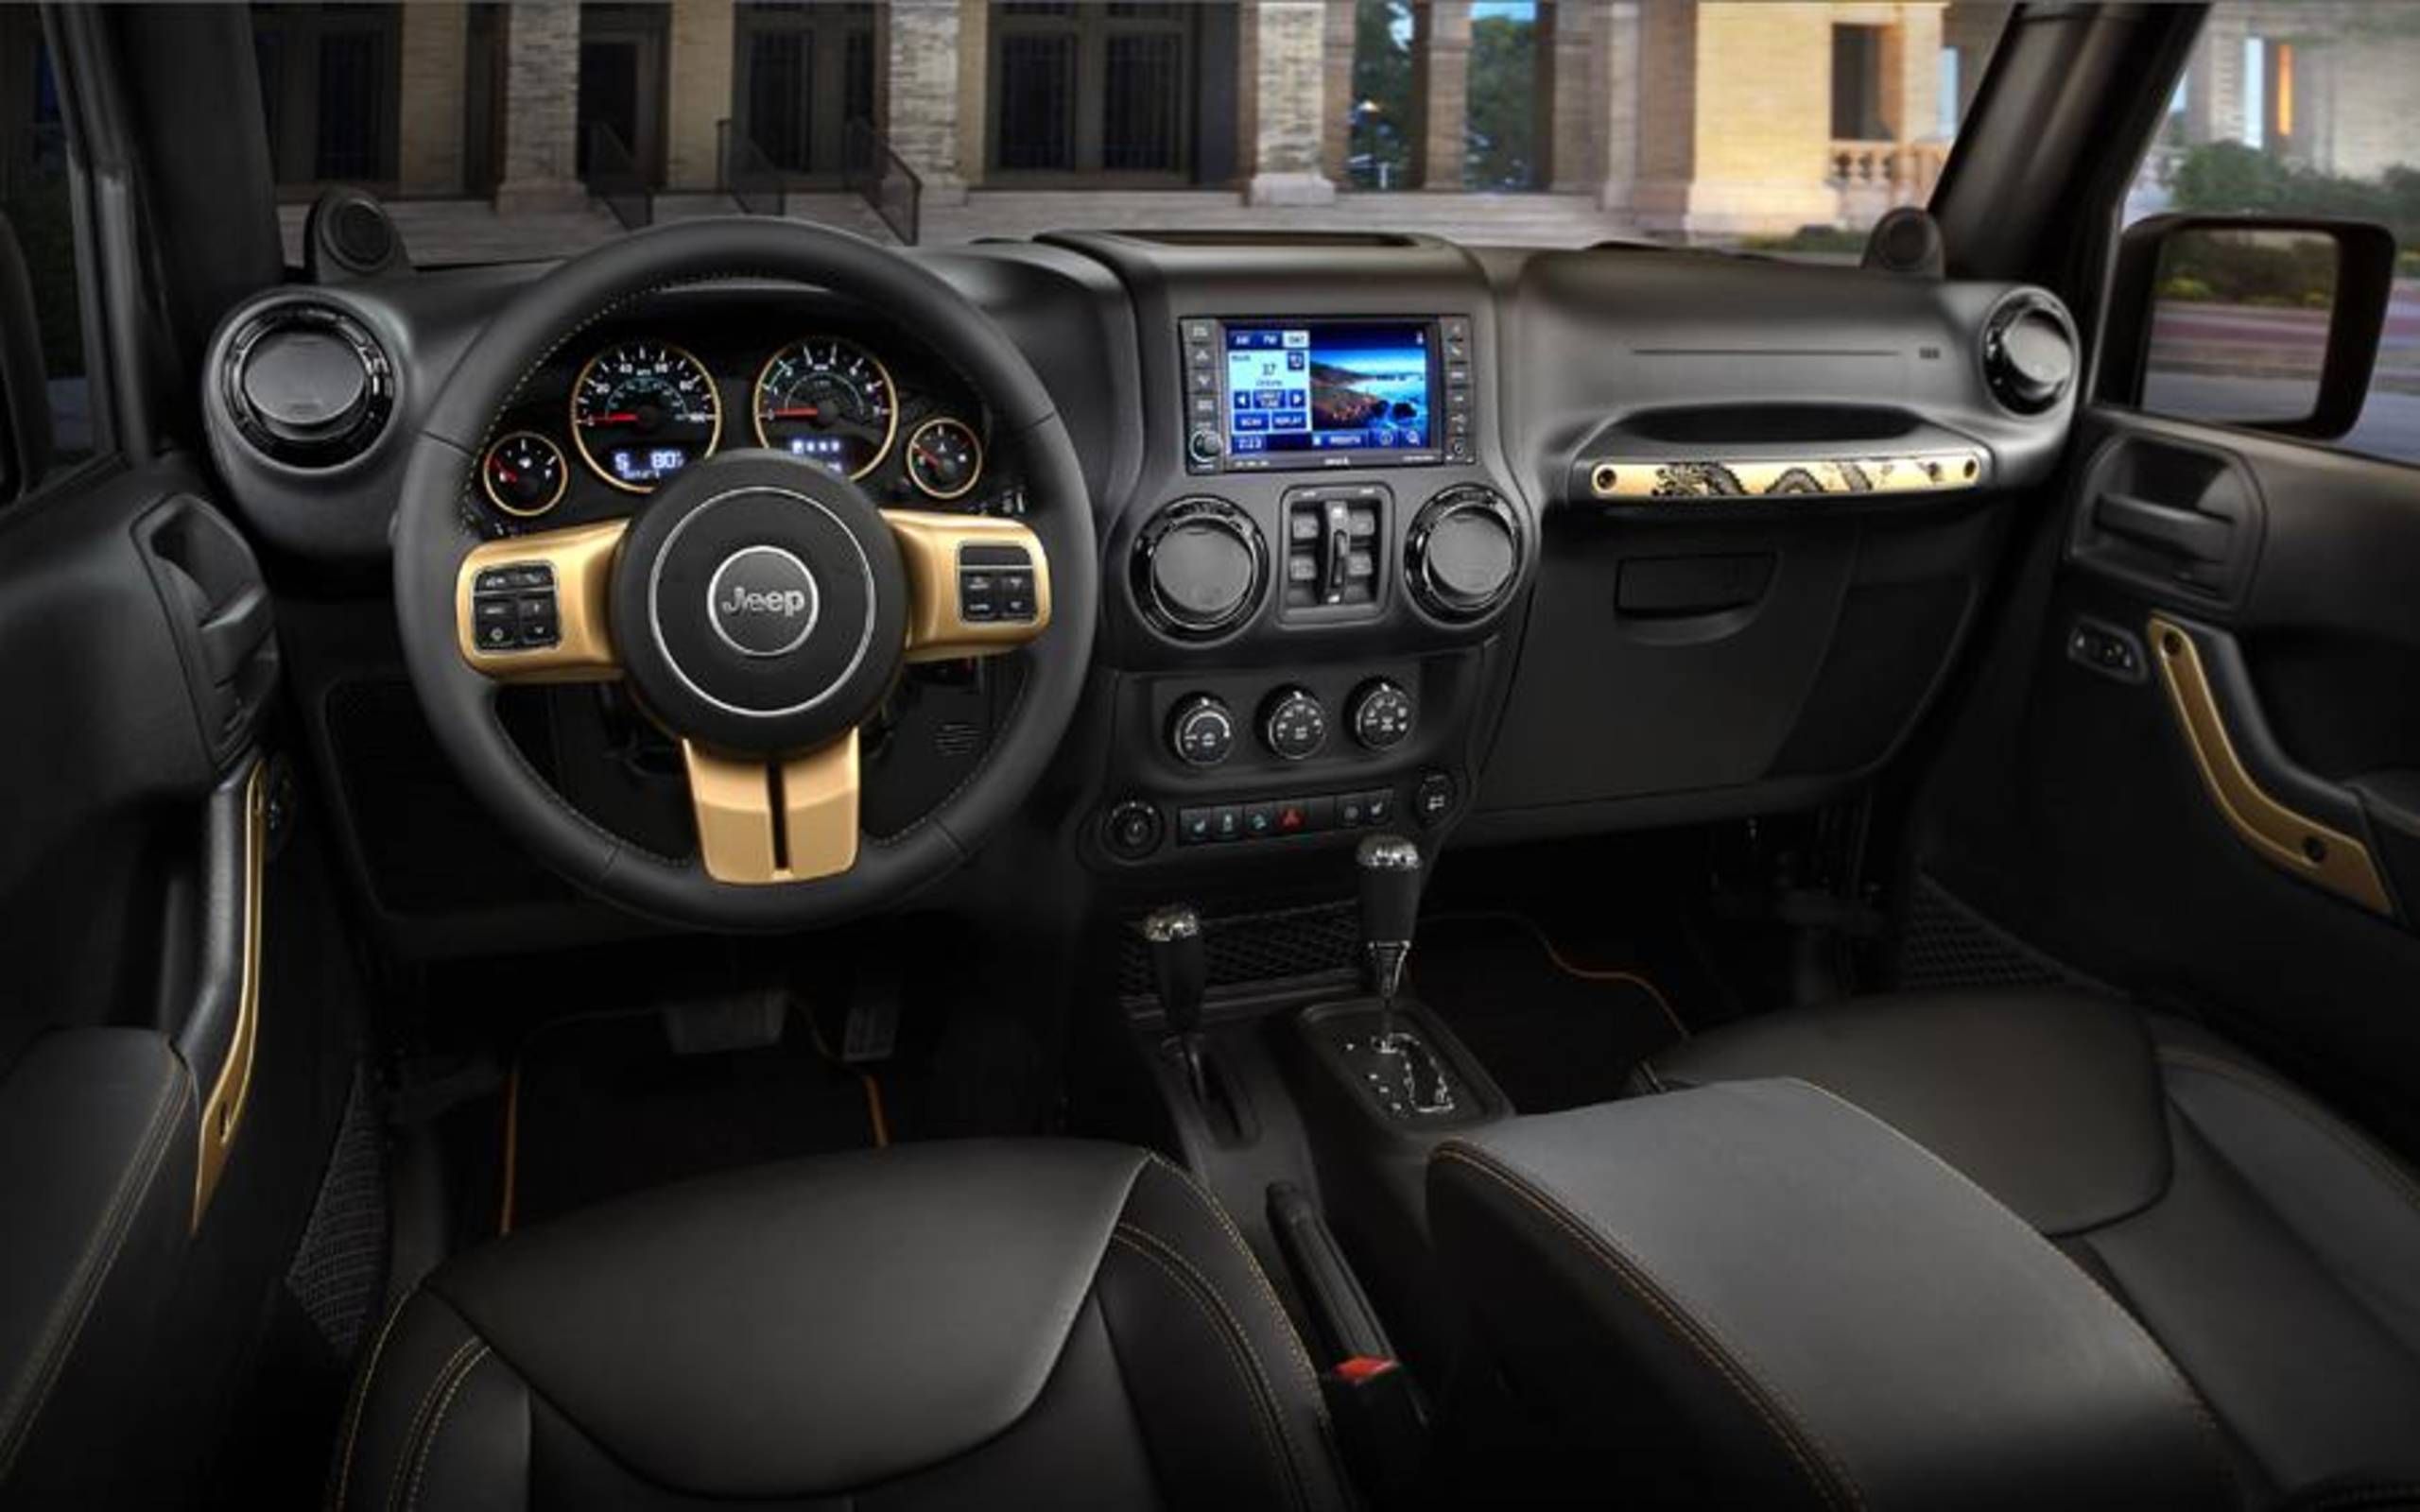 2014 Jeep Wrangler Unlimited Dragon Edition review notes